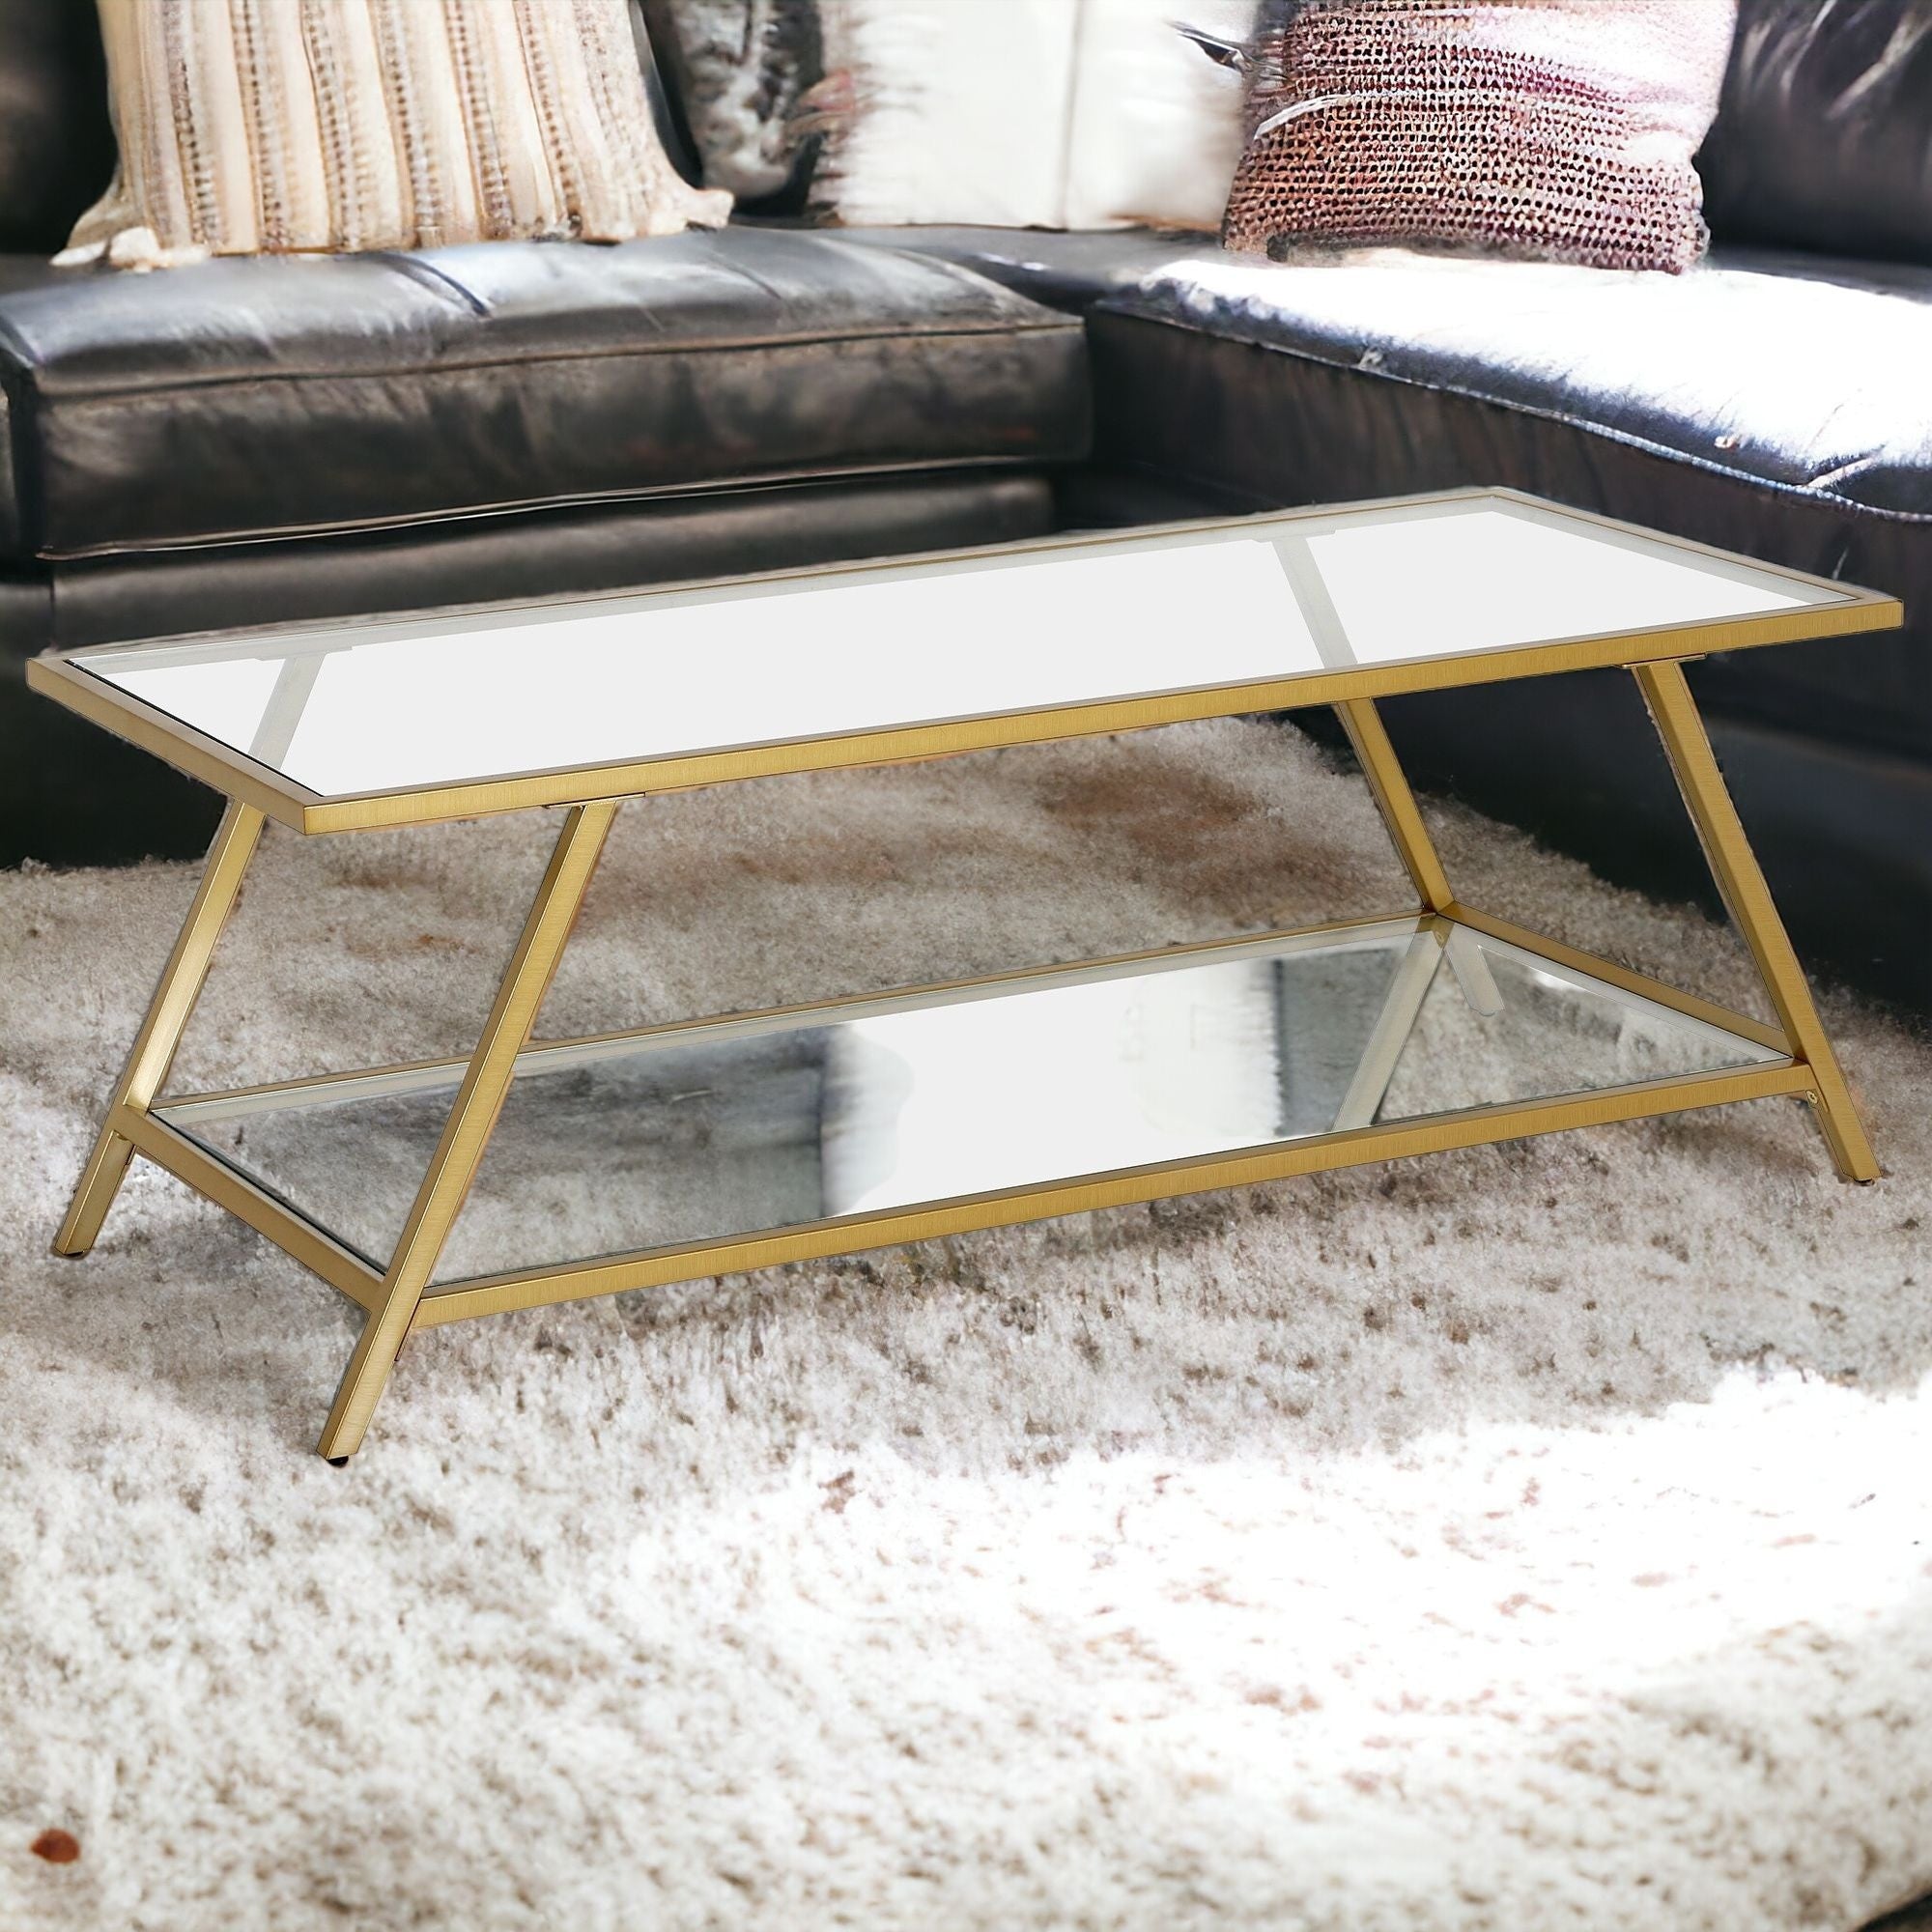 48" Gold Glass And Steel Coffee Table With Shelf